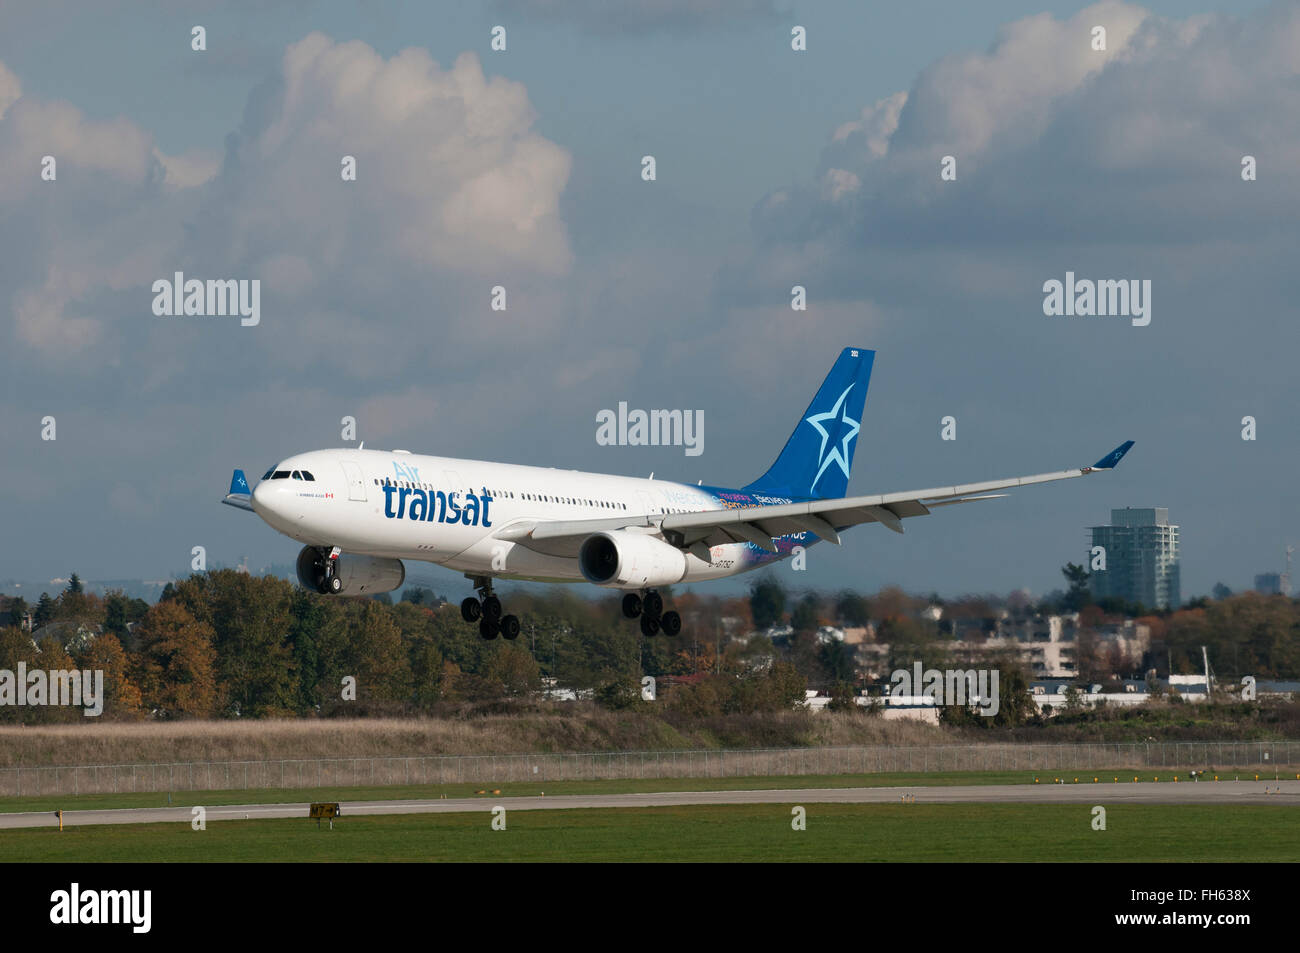 Transat Airbus A330-200 landing approach at YVR Vancouver International  Airport Stock Photo - Alamy